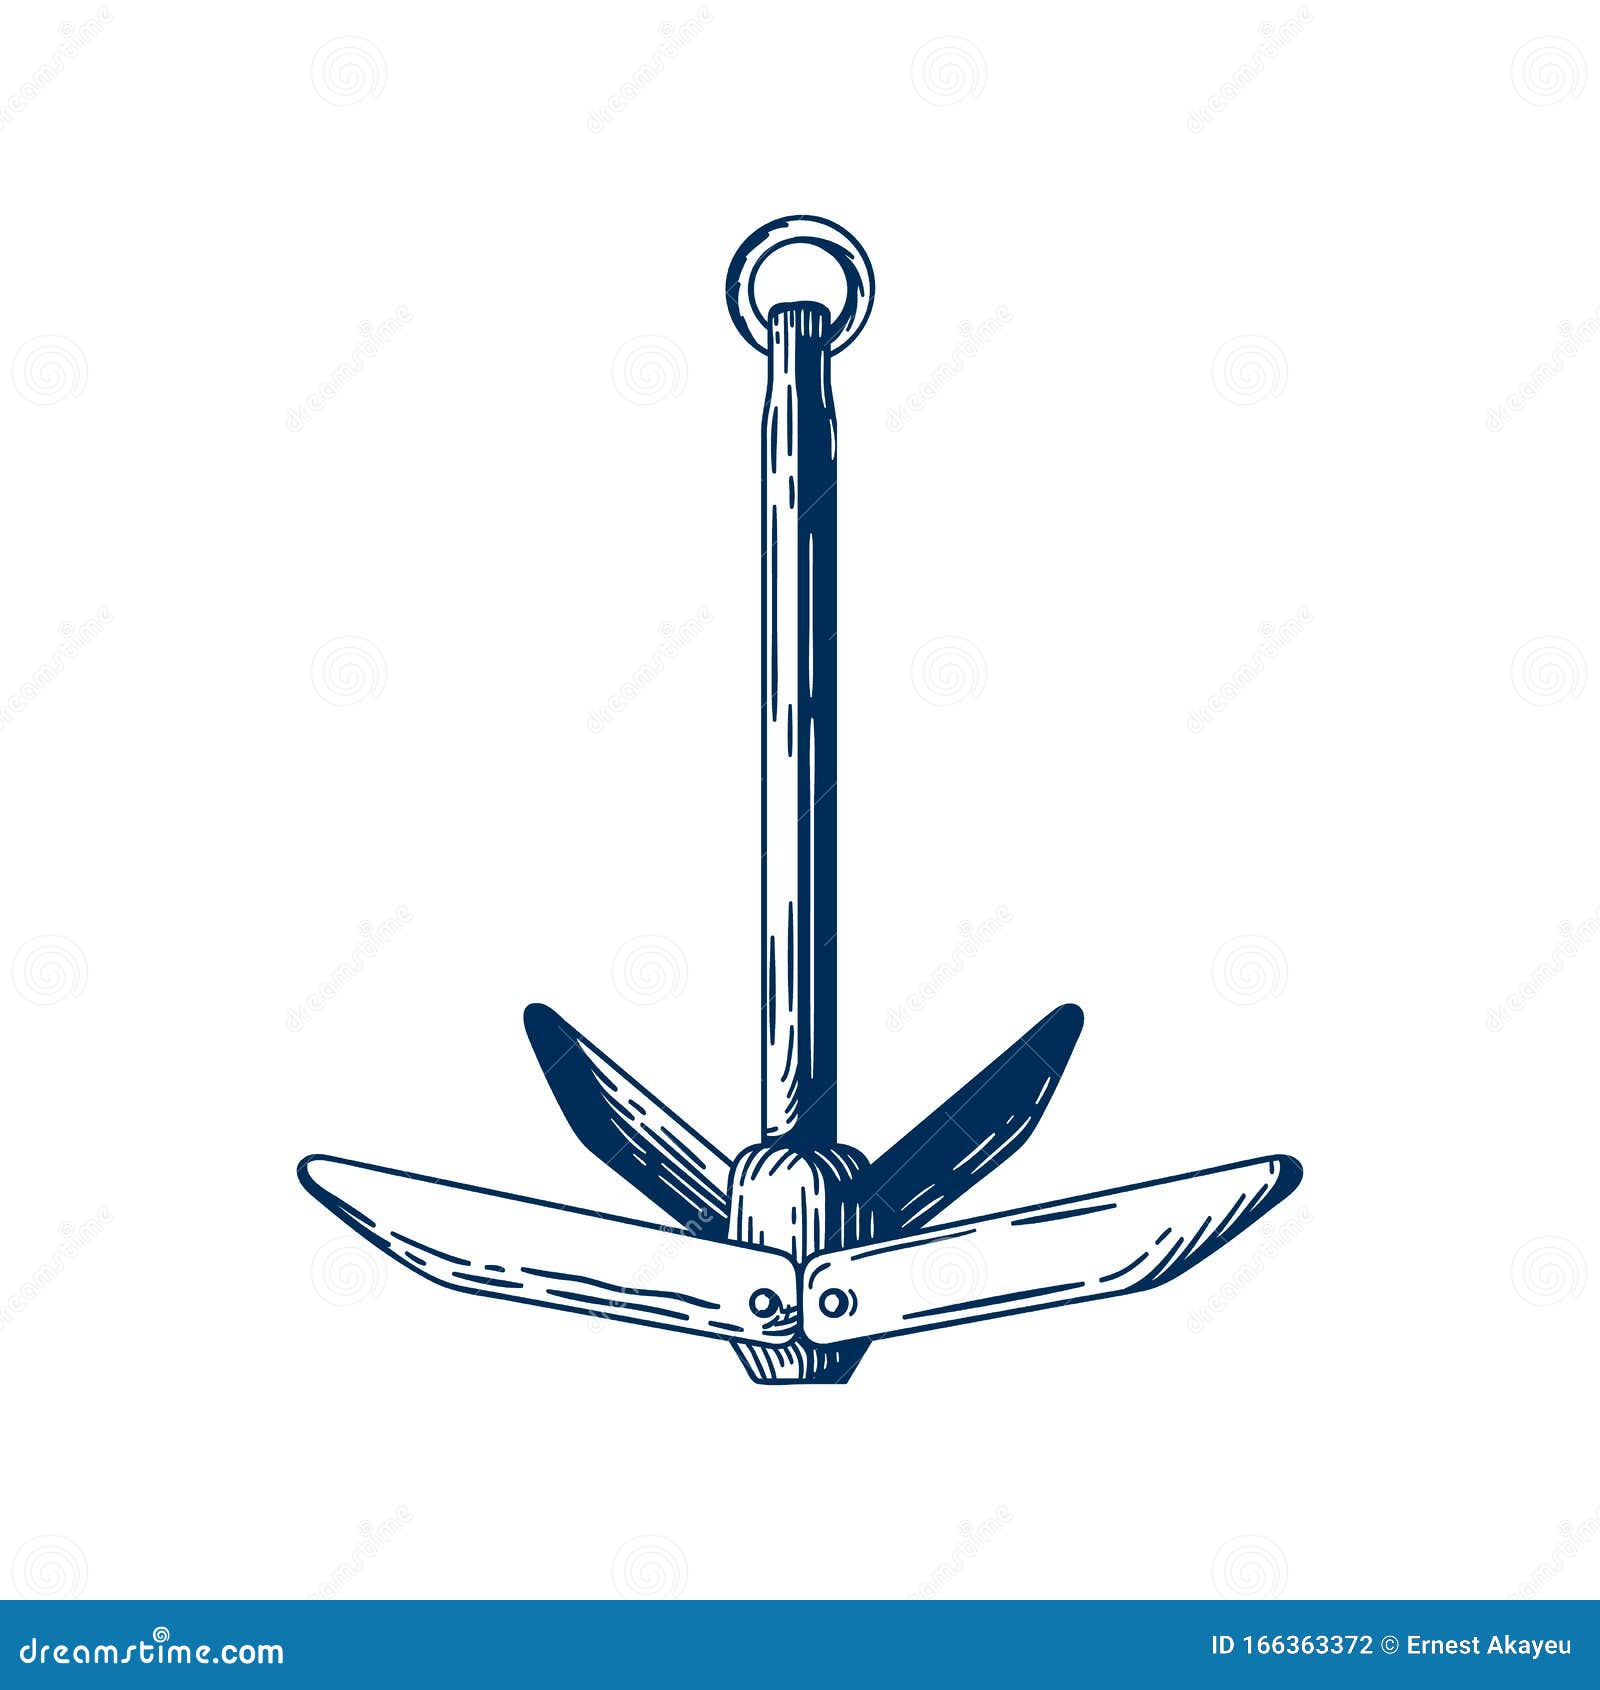 Boat Anchor Vector Illustration. Holding Ship in Place